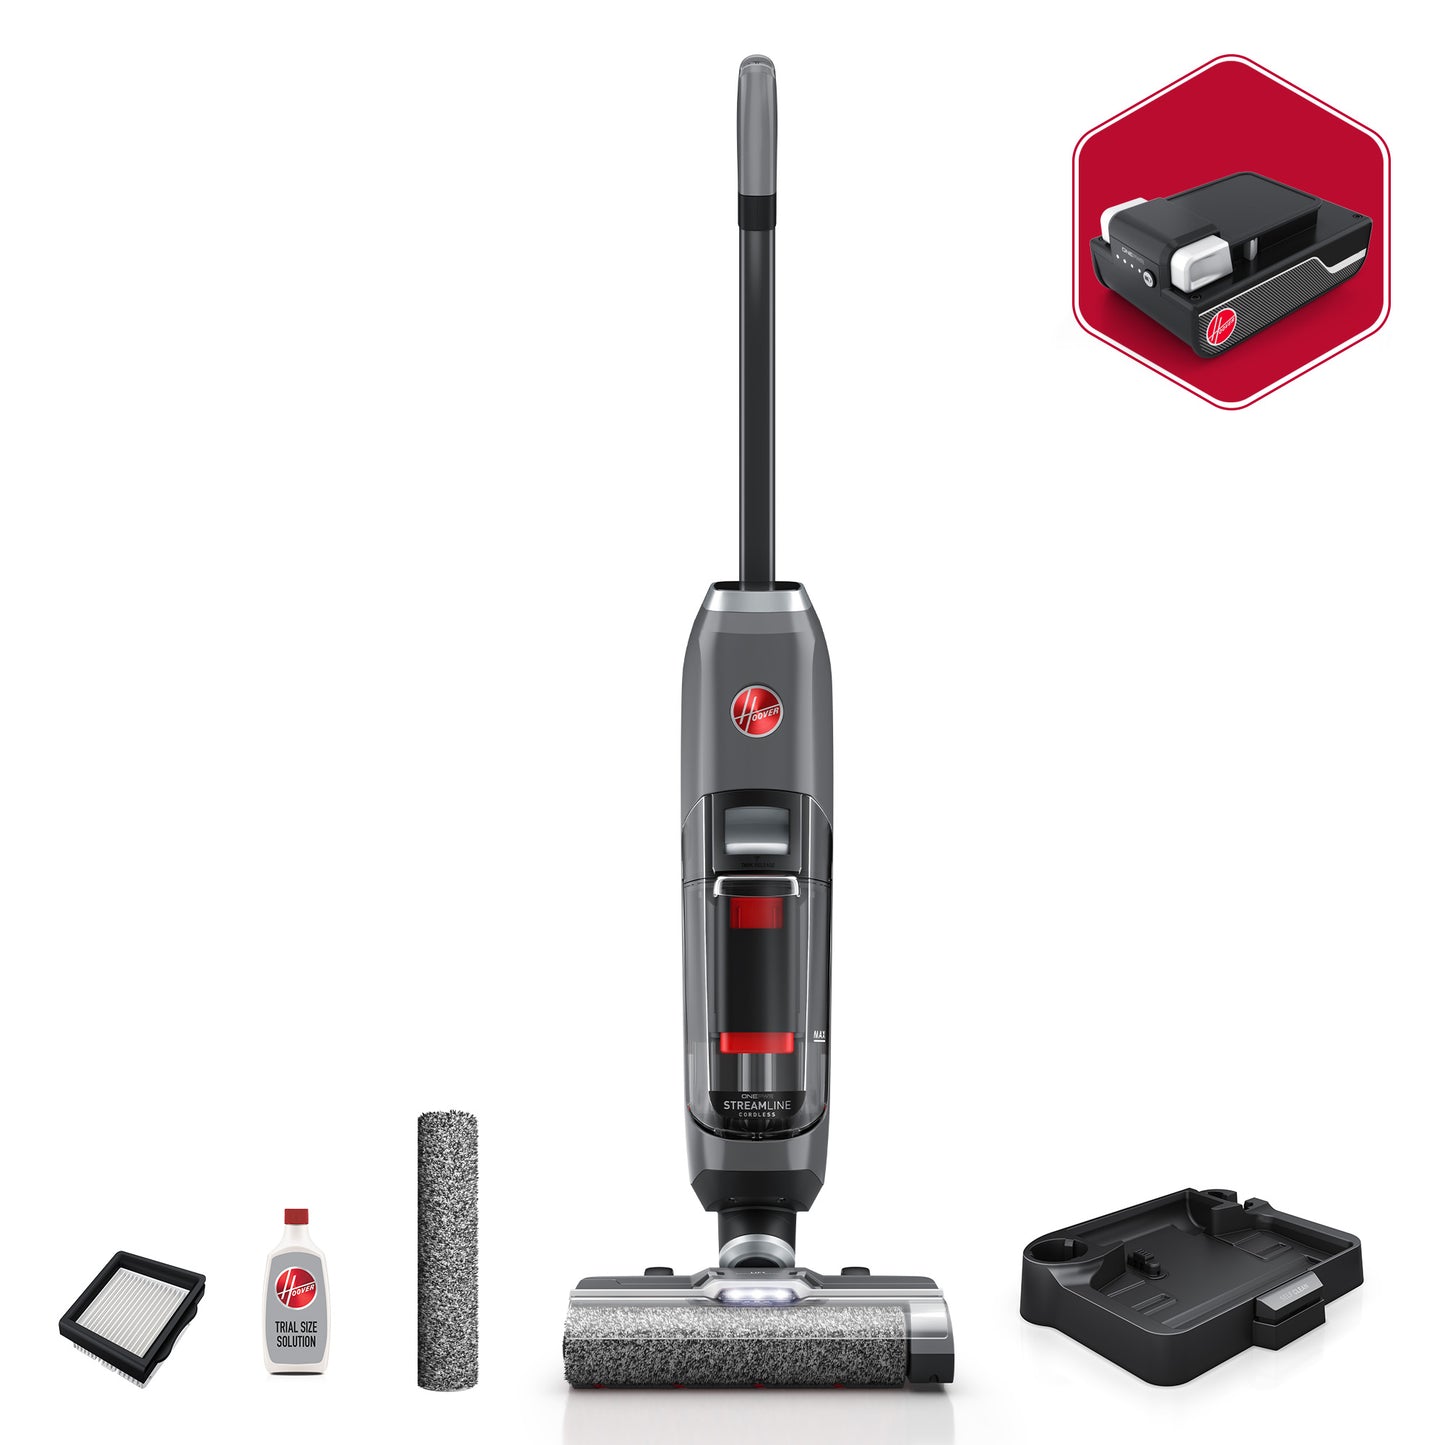 ONEPWR Hand Vacuum – Hoover